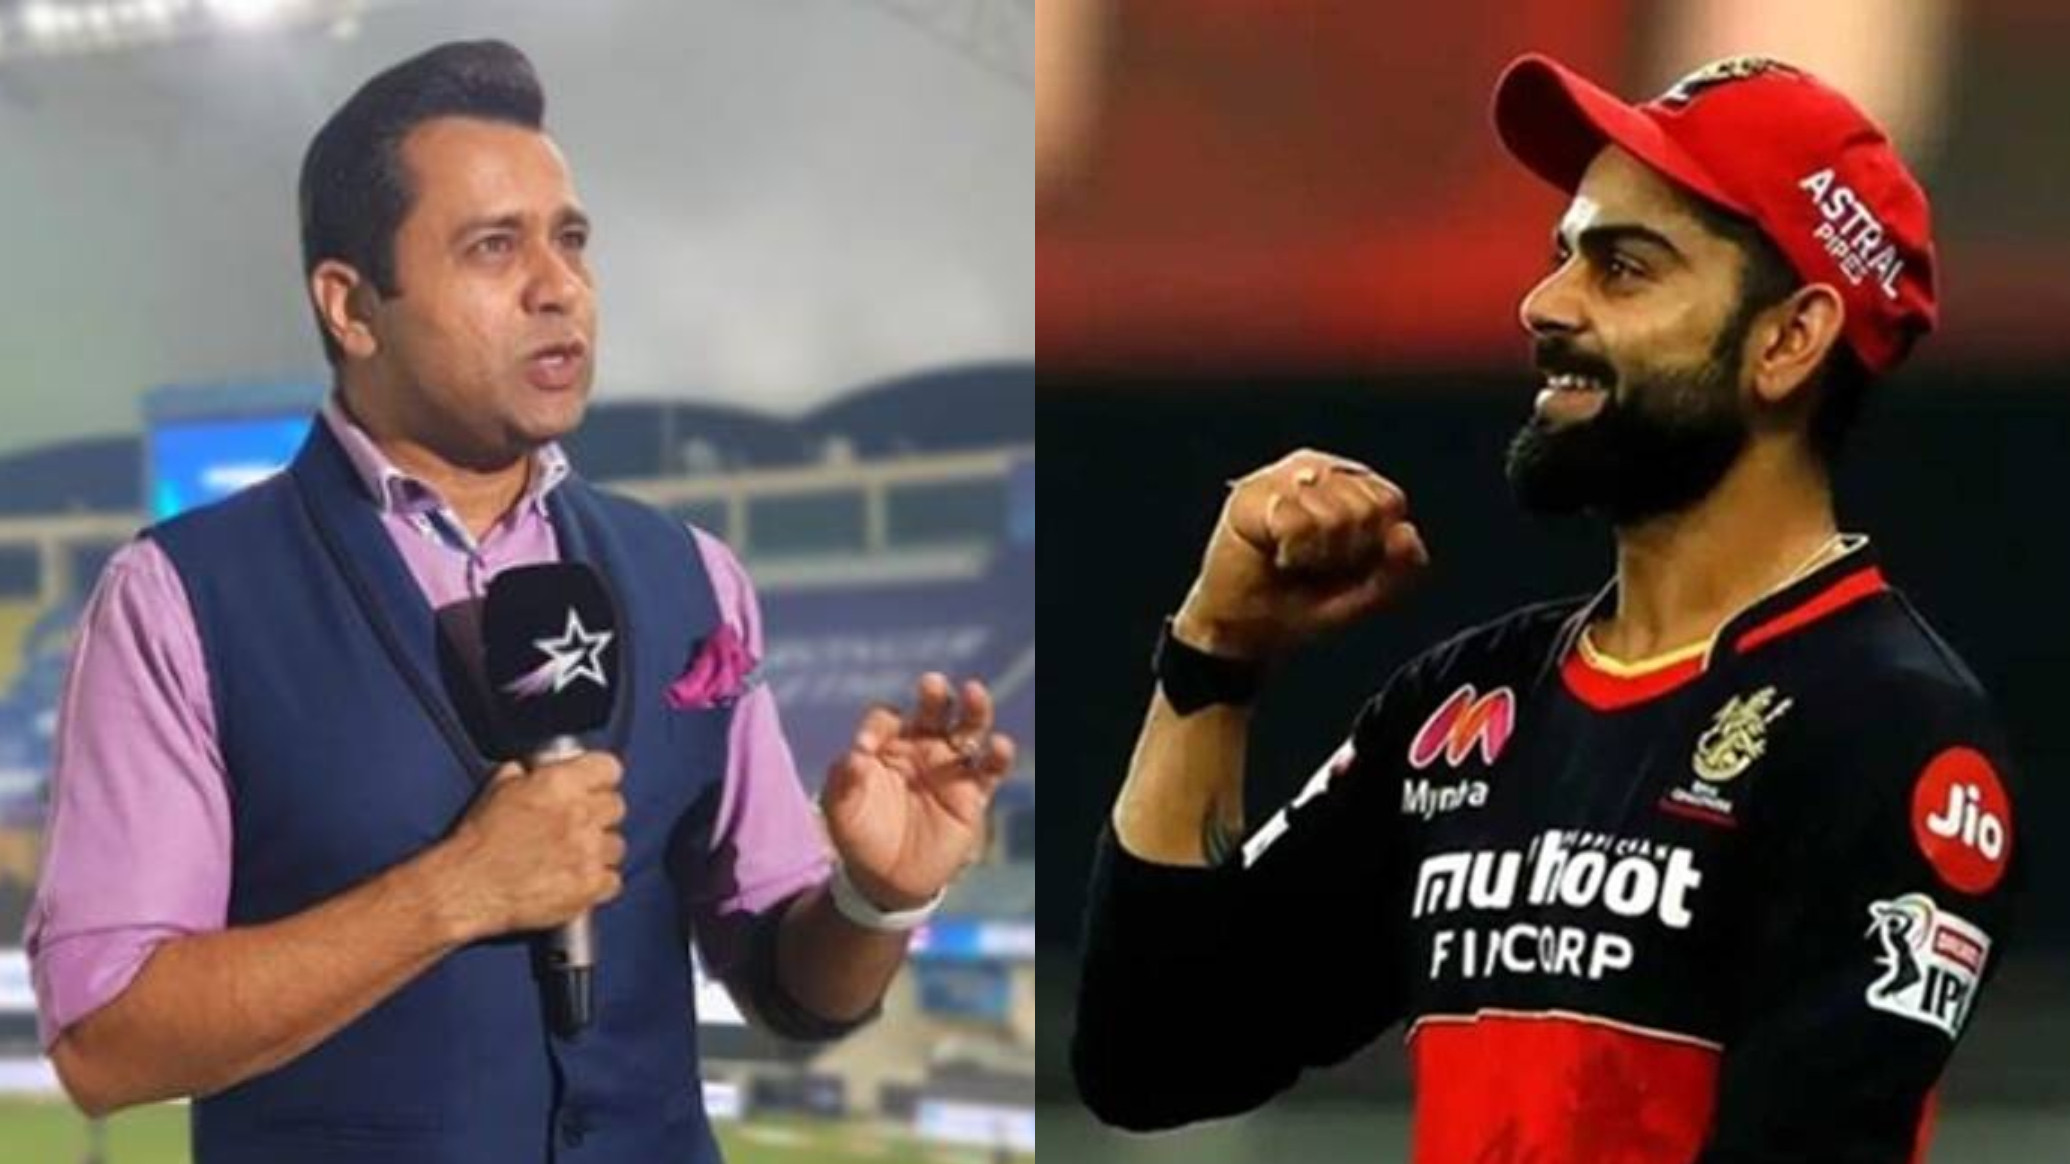 IPL 2022: “They might go back to him as situation has changed”- Chopra against Kohli returning as RCB captain